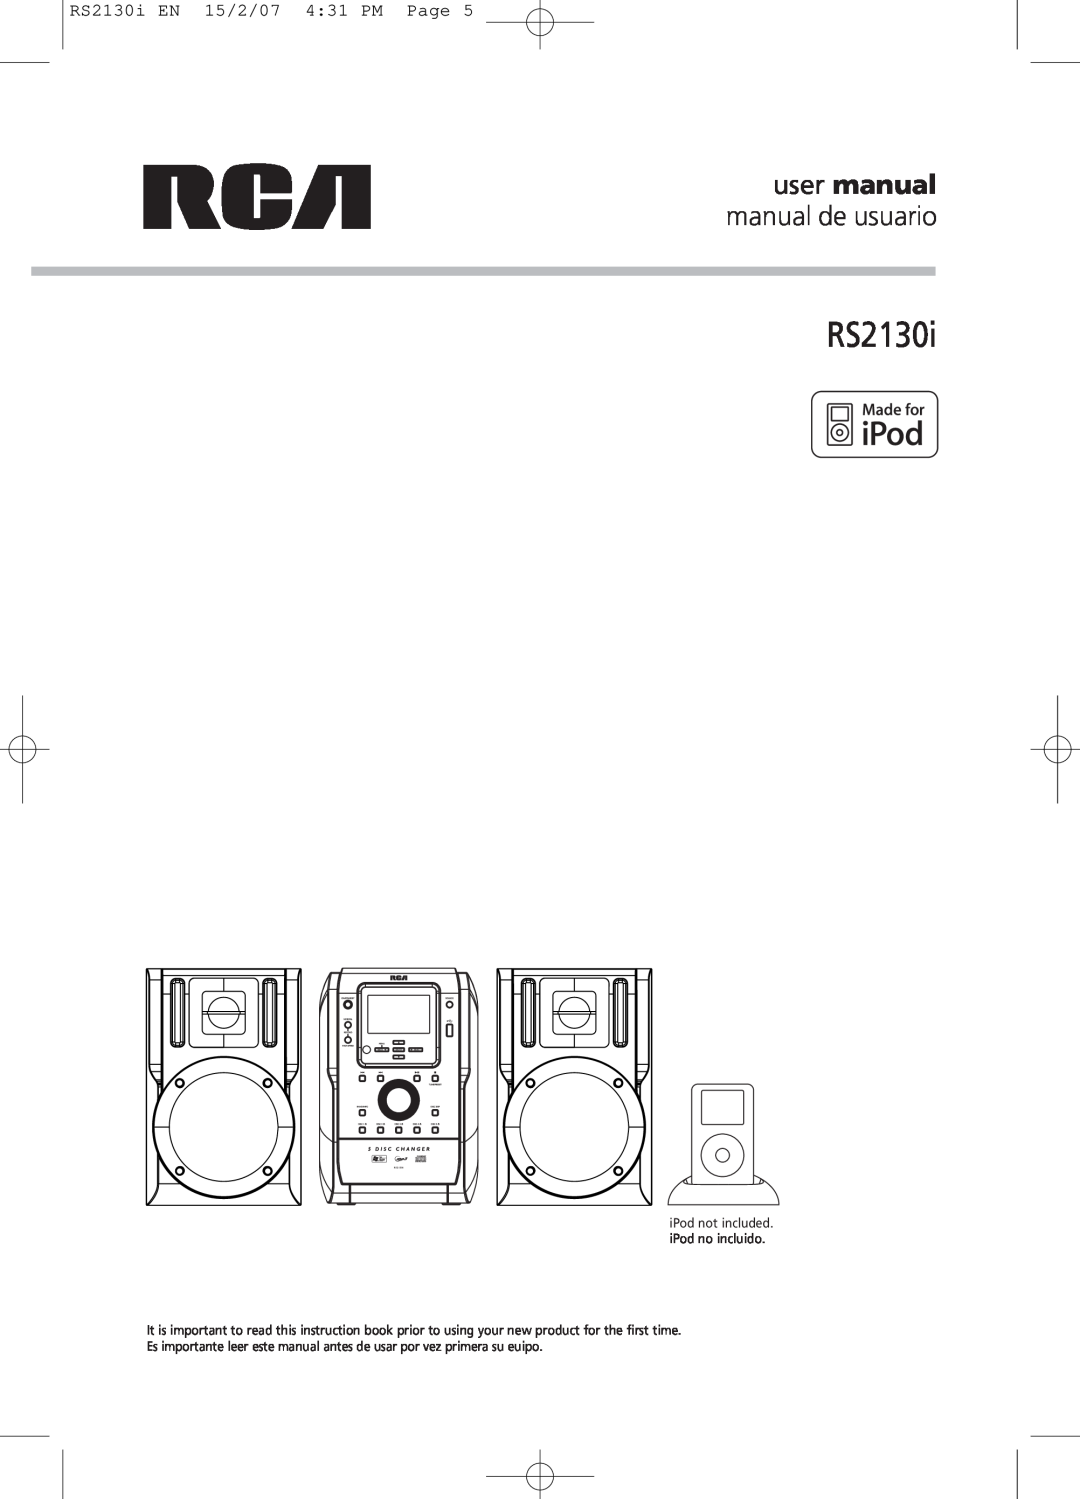 RCA user manual RS2130i EN 15/2/07 4 31 PM Page, iPod not included. iPod no incluido 